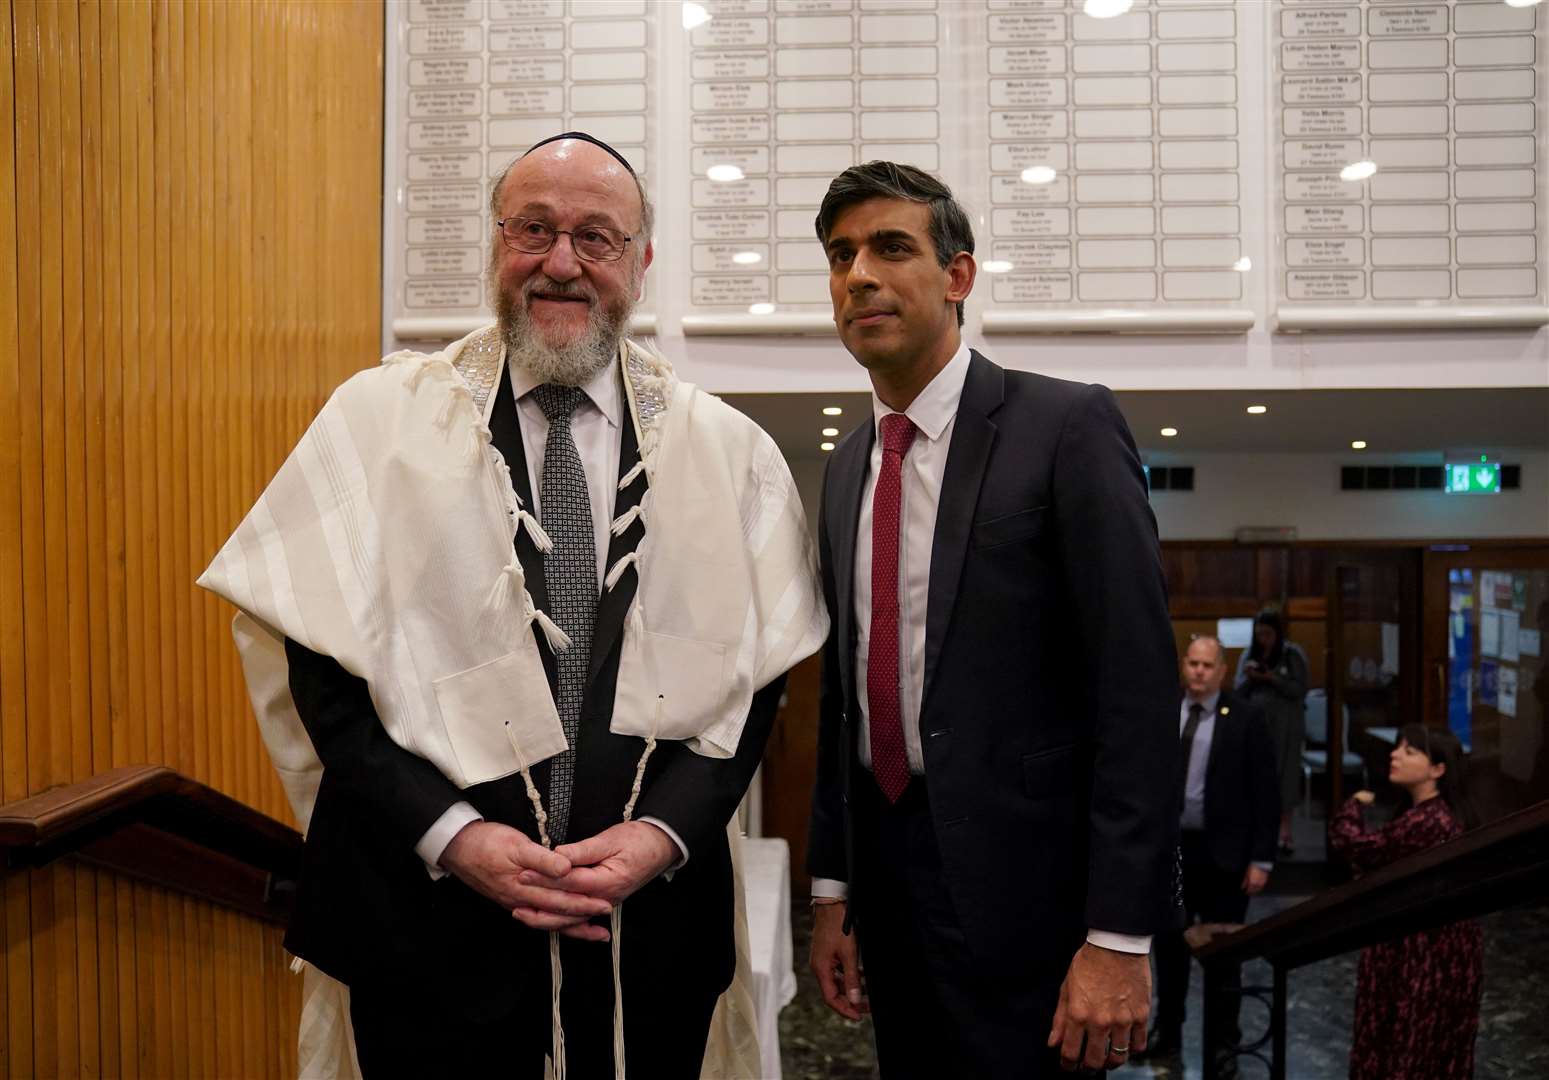 Chief Rabbi Sir Ephraim Mirvis thanked Prime Minister Rishi Sunak for attending the prayer service at a synagogue in north London (Lucy North/PA)